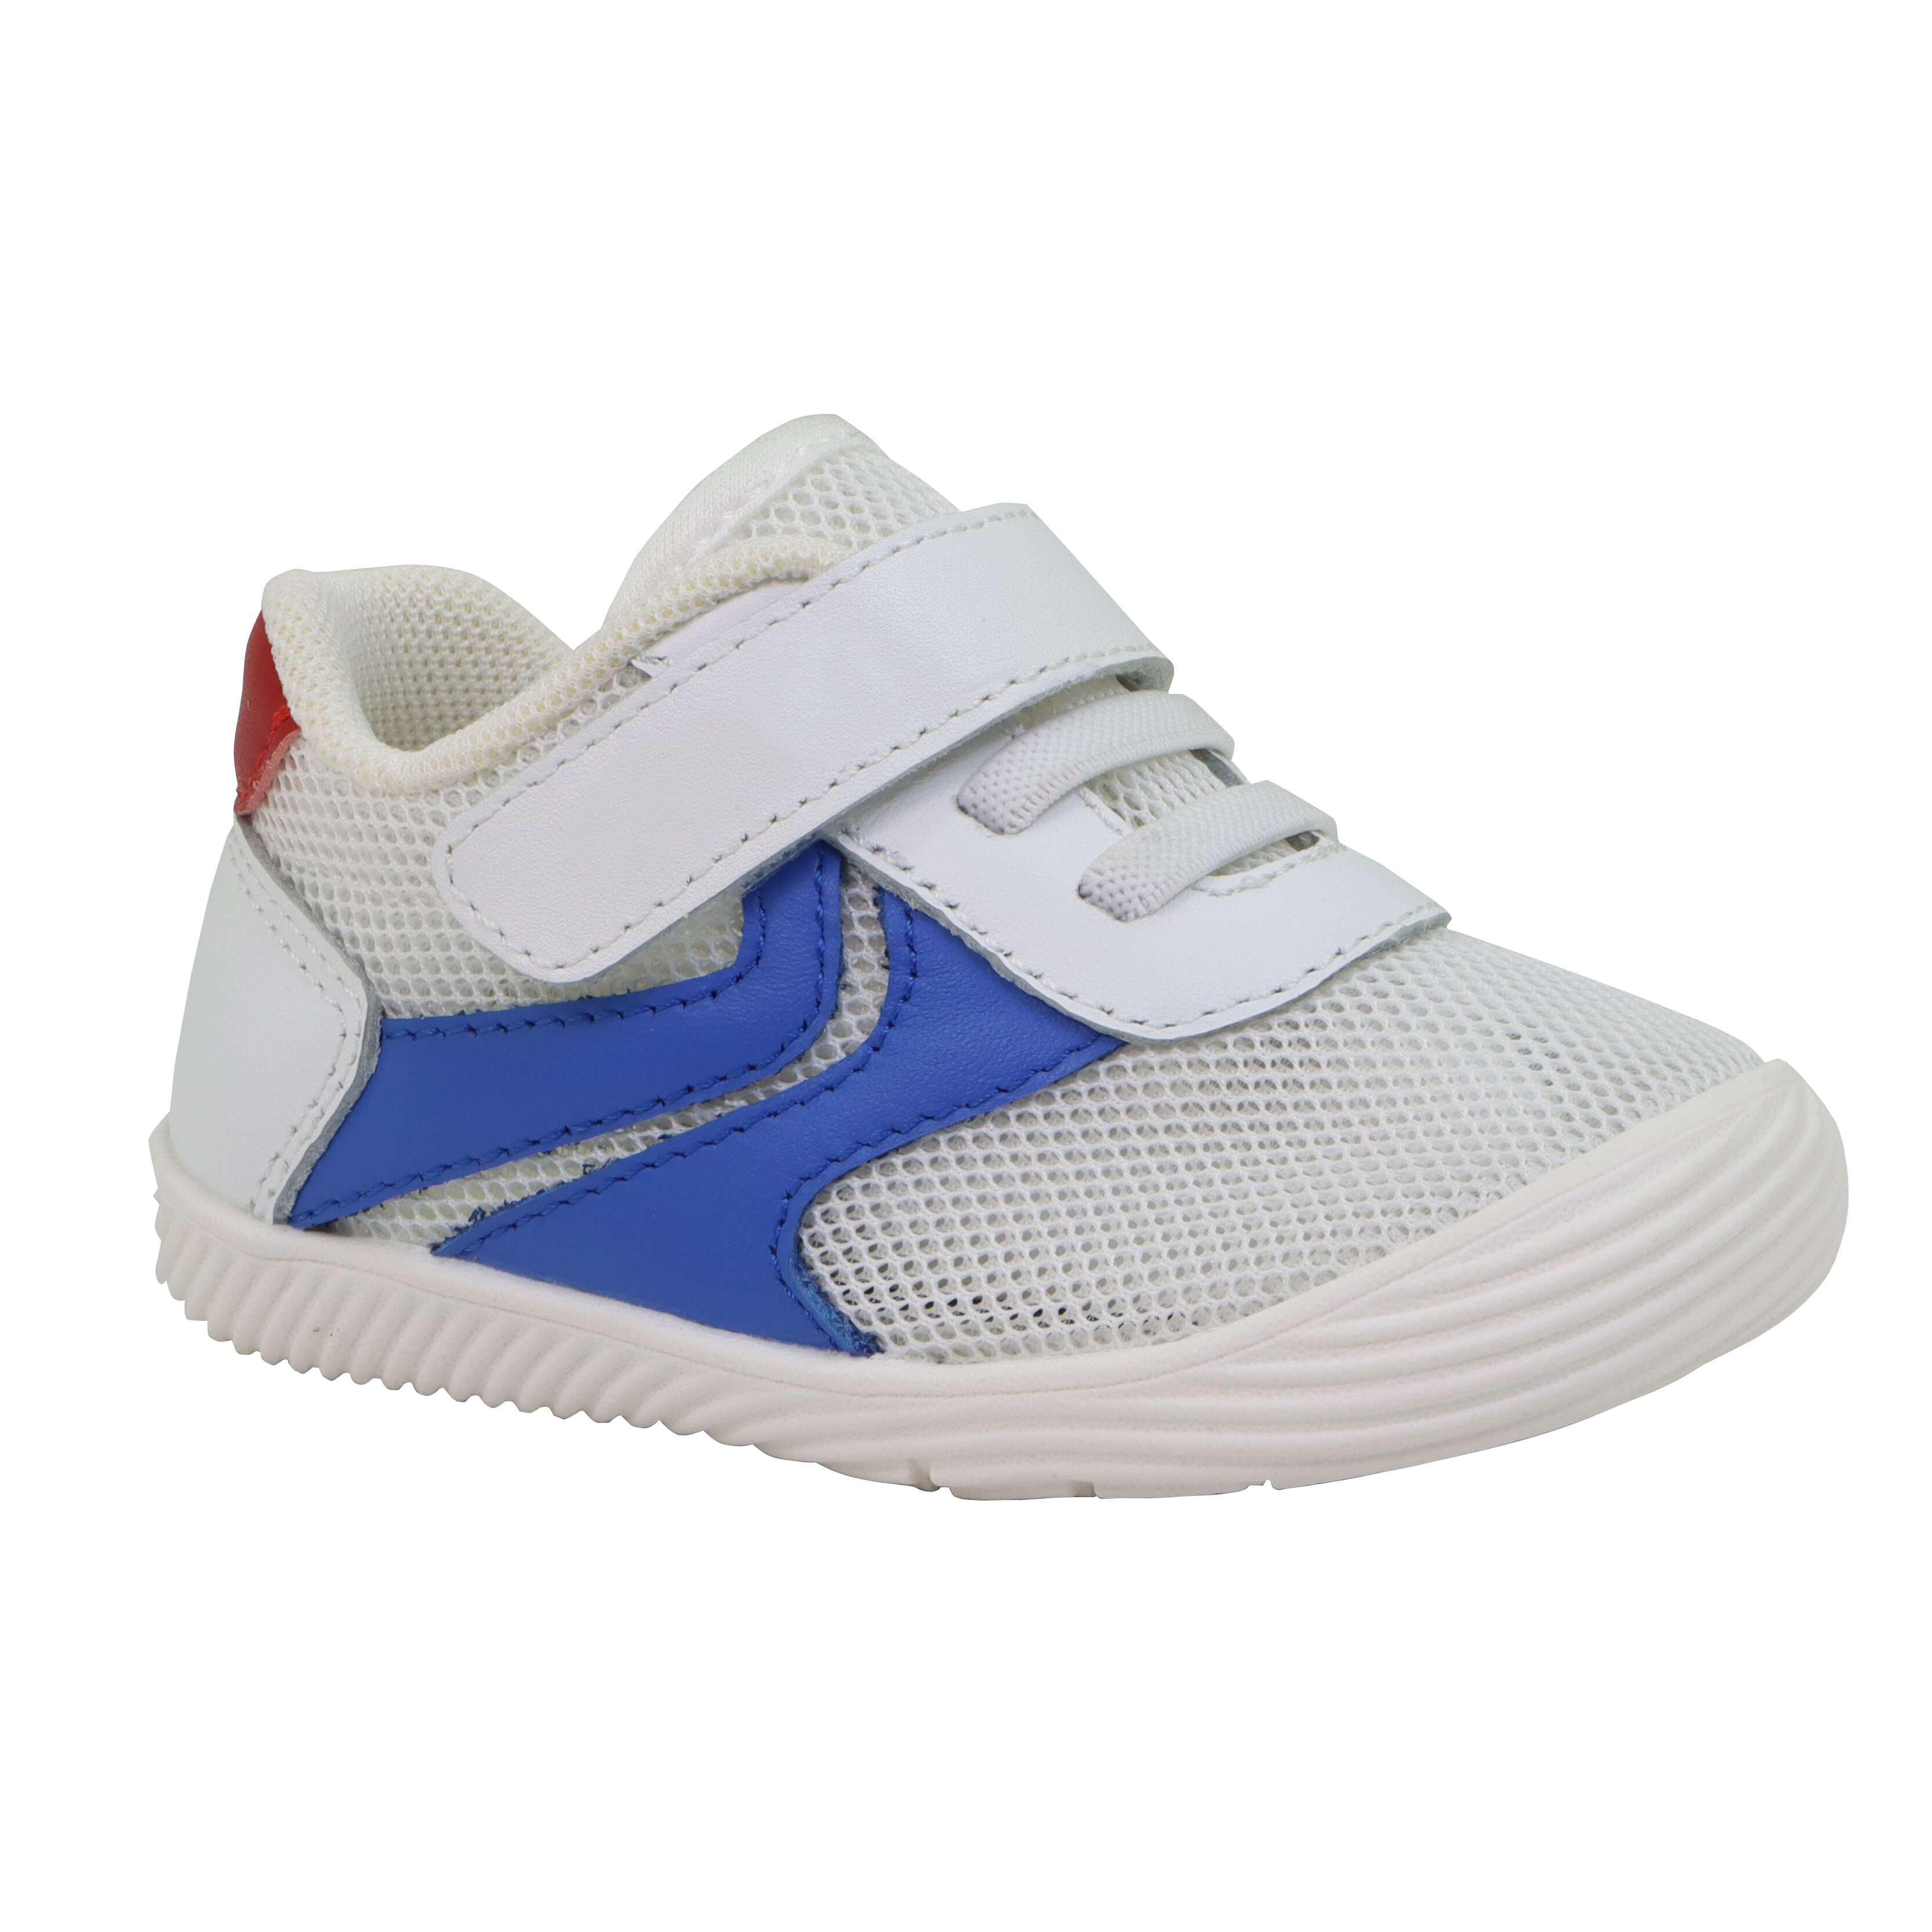 Lightweight Running Shoes Toddlers Casual Breathable Walking Shoesoes